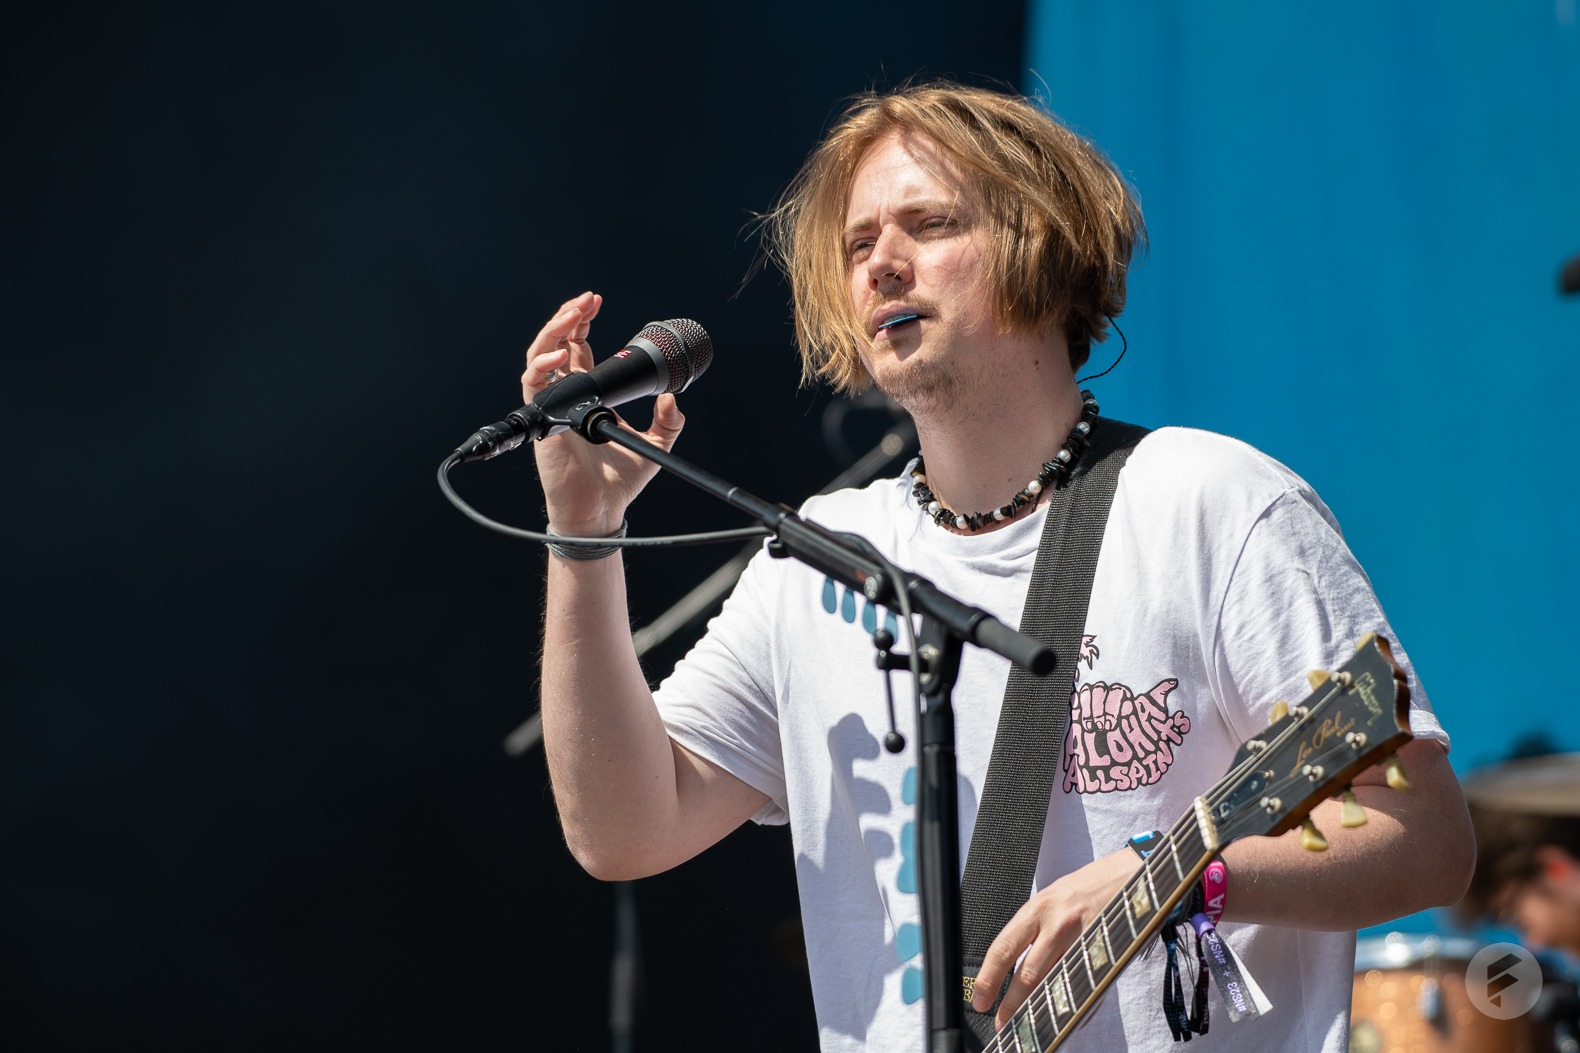 Nothing but Thieves · Rock am Ring 2023